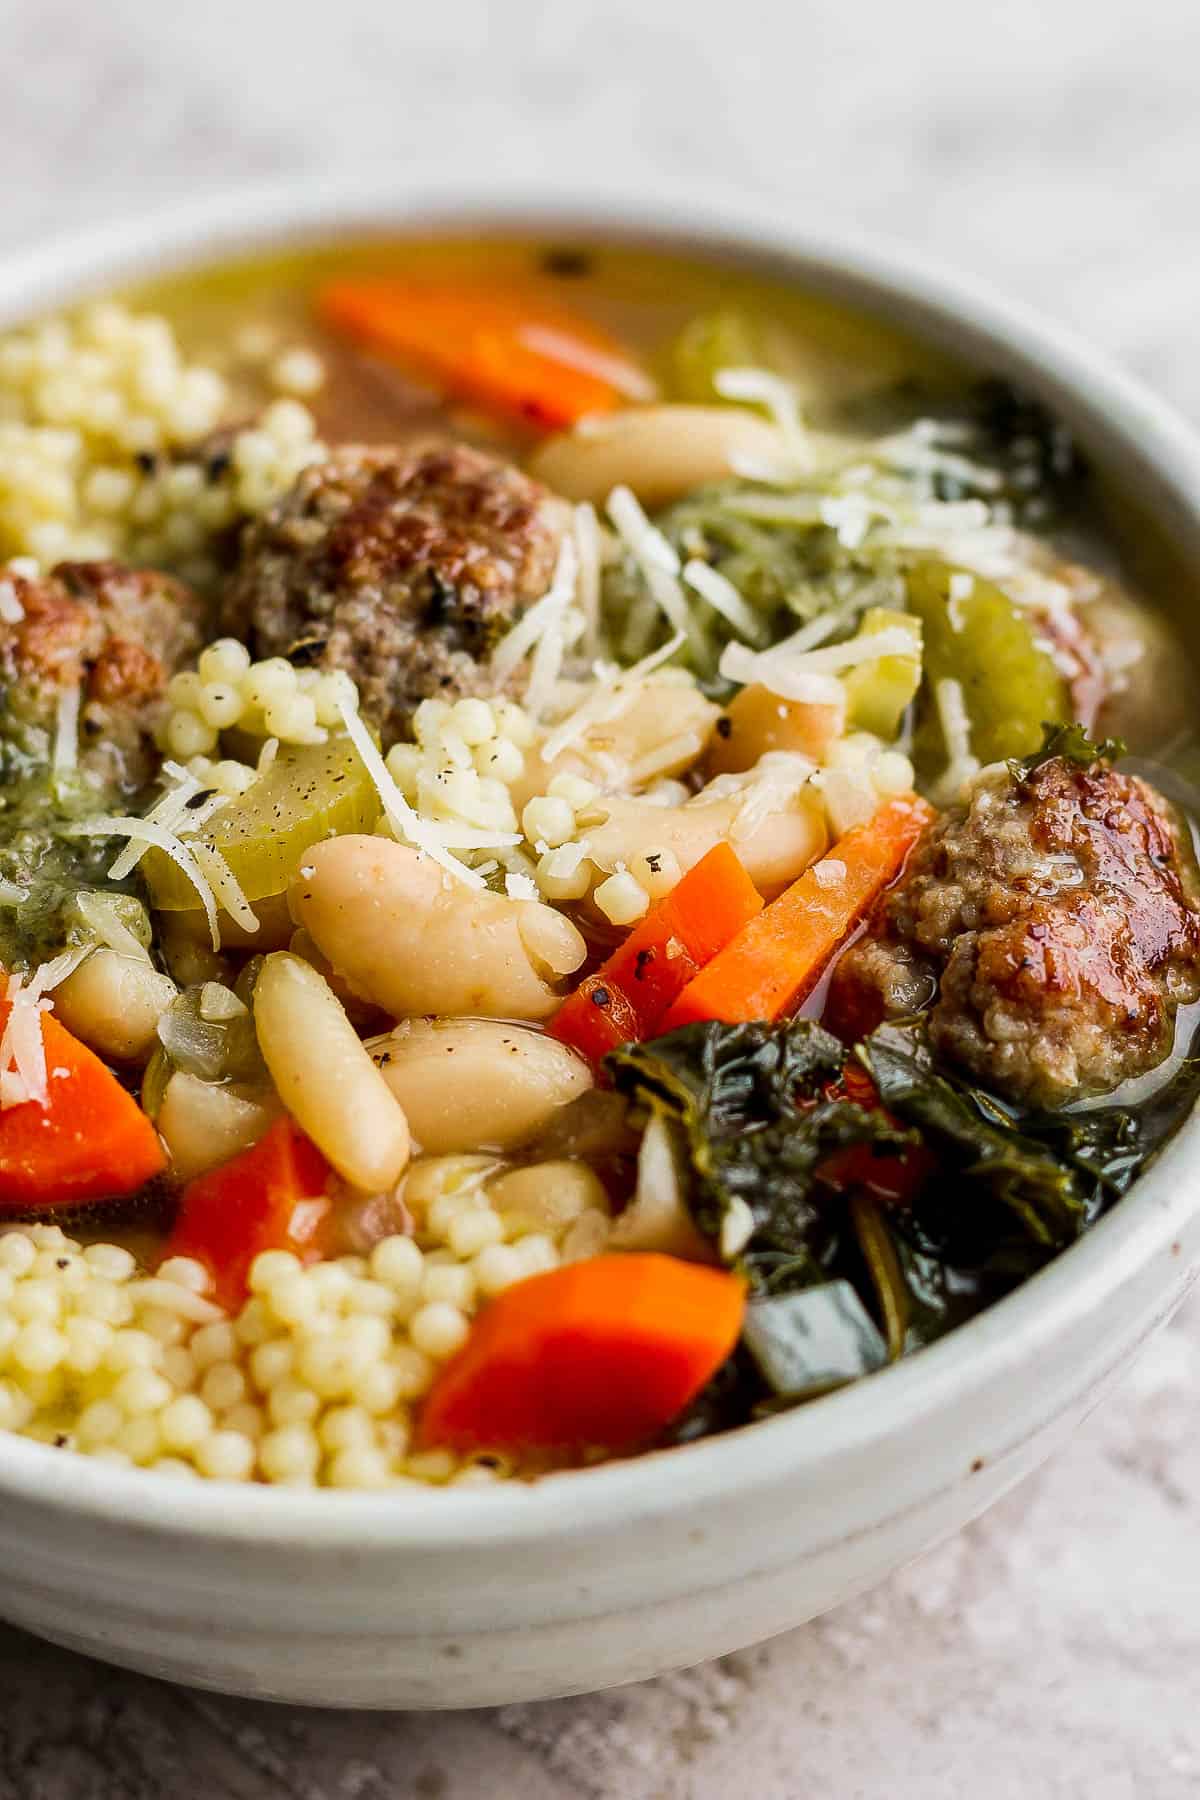 Another image of the best Italian wedding soup with all the toppings.